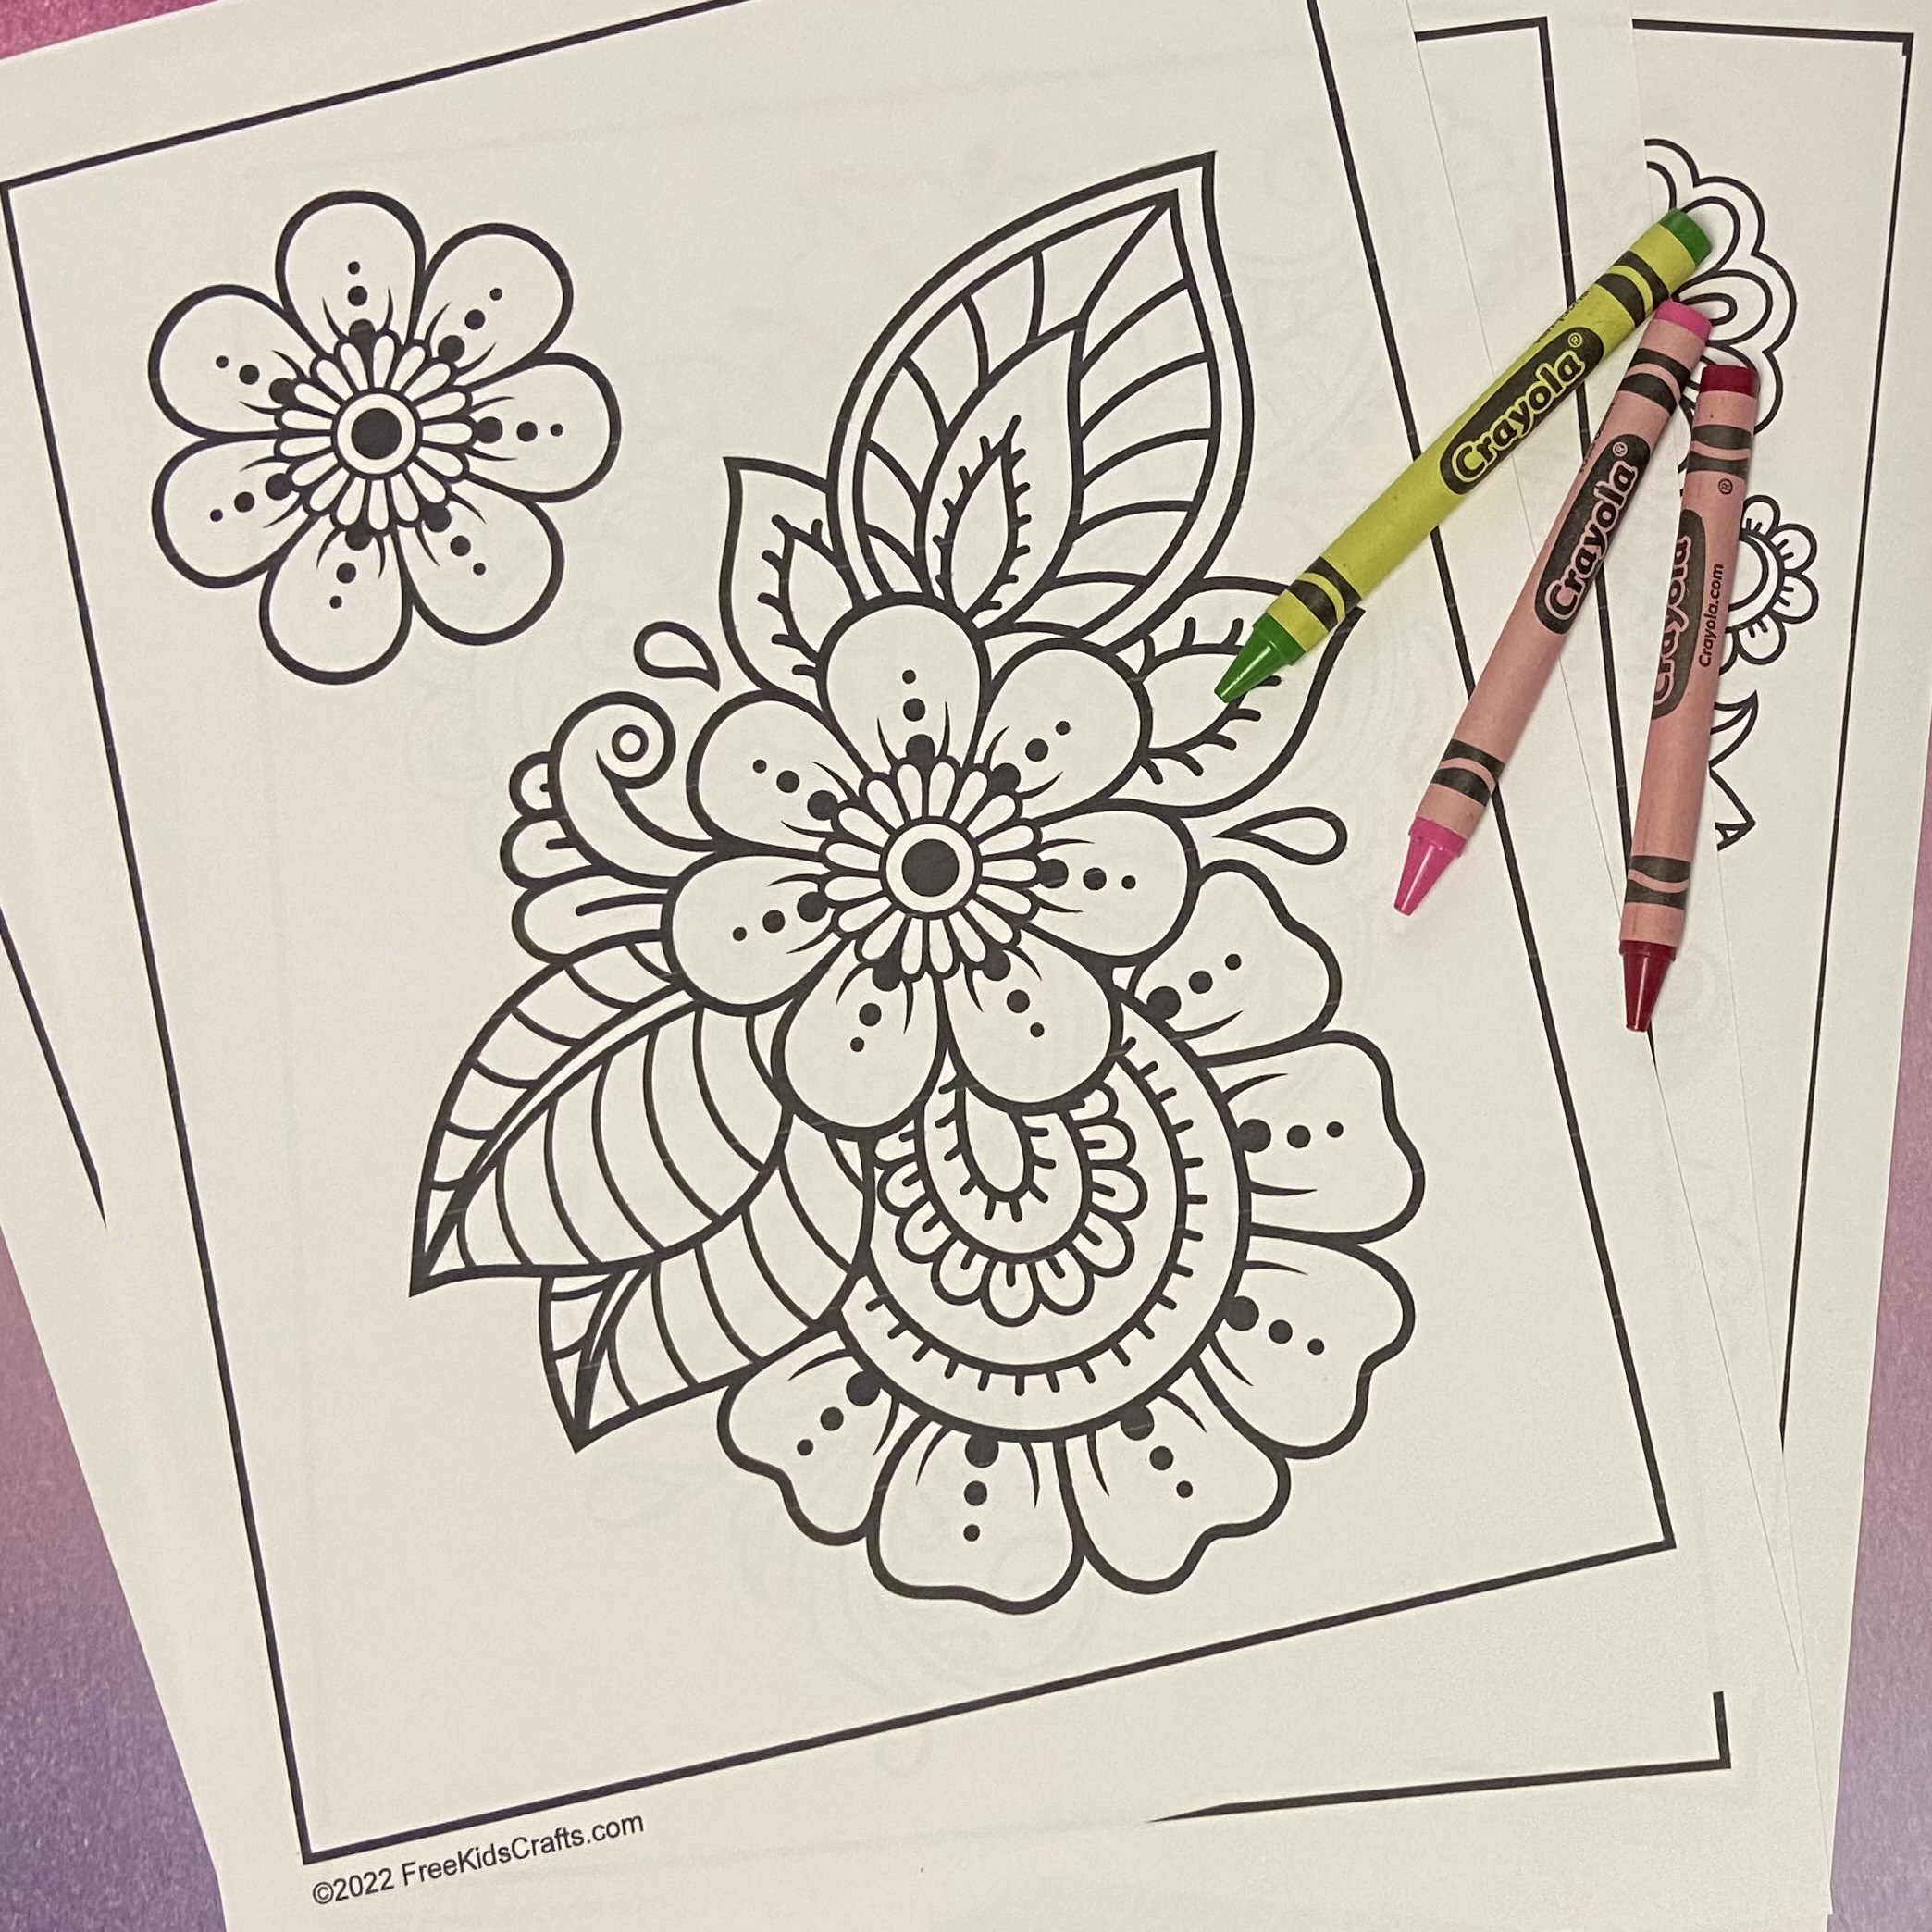 Pin on Coloring Books, Pages, and More